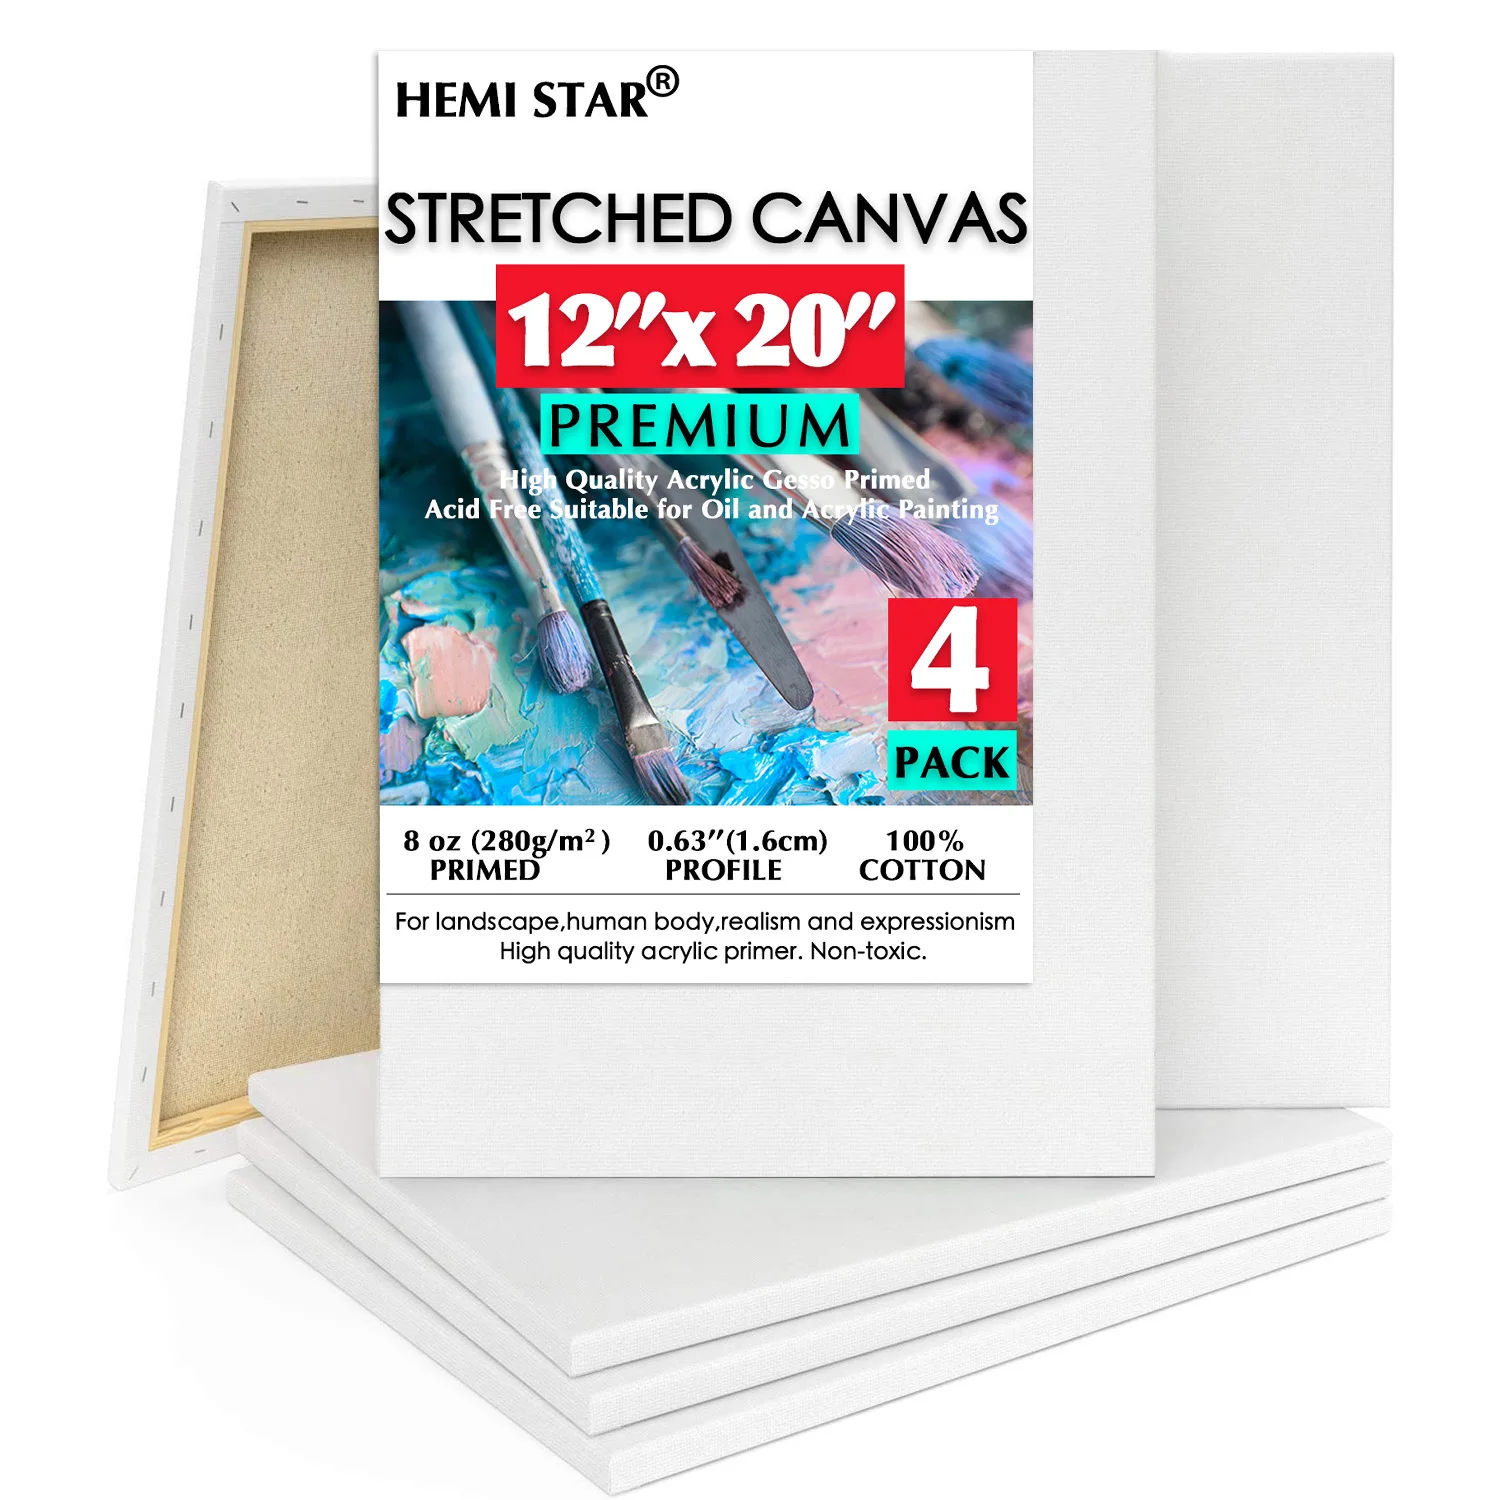 

4 pcs Stretched Canvas for Paint 30x50cm,12x20 inch Primed White 100% Cotton Blank Canvas Boards for Painting 8 oz Gesso-Primed